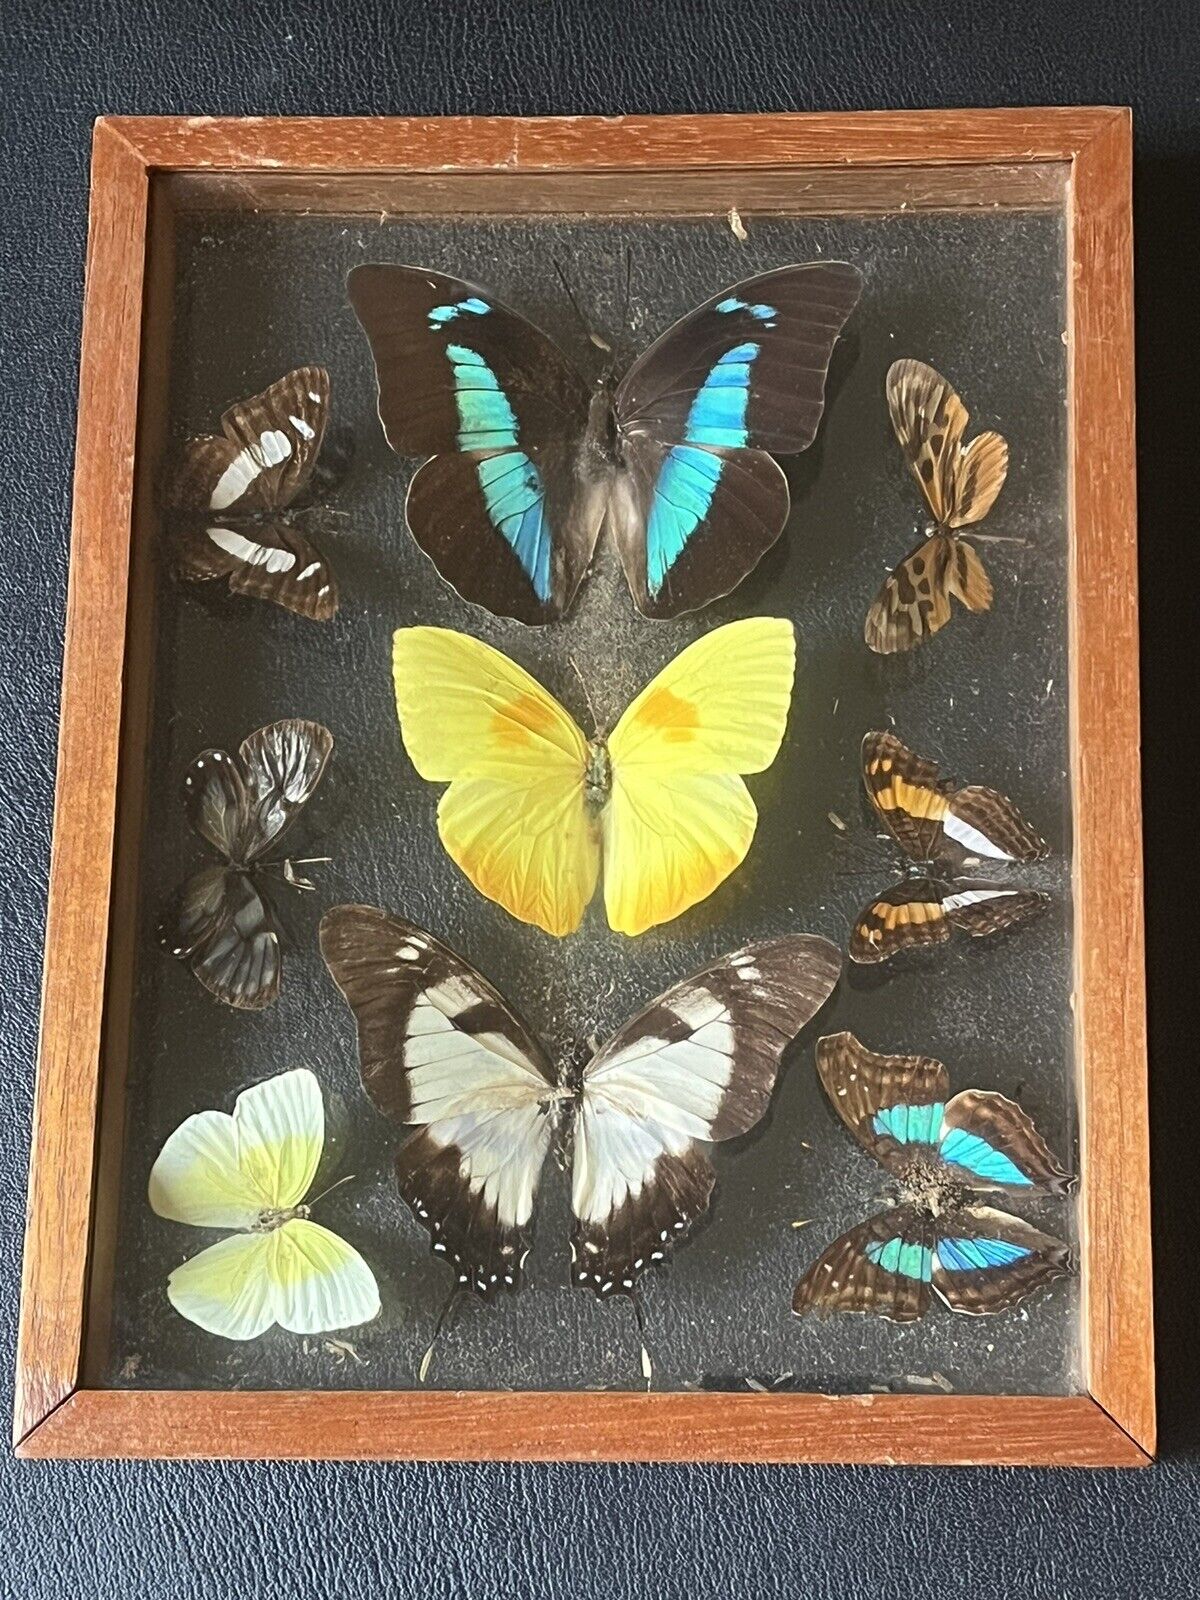 Vintage Original Butterfly Moth Taxidermy In Wood Box 9 Specimens